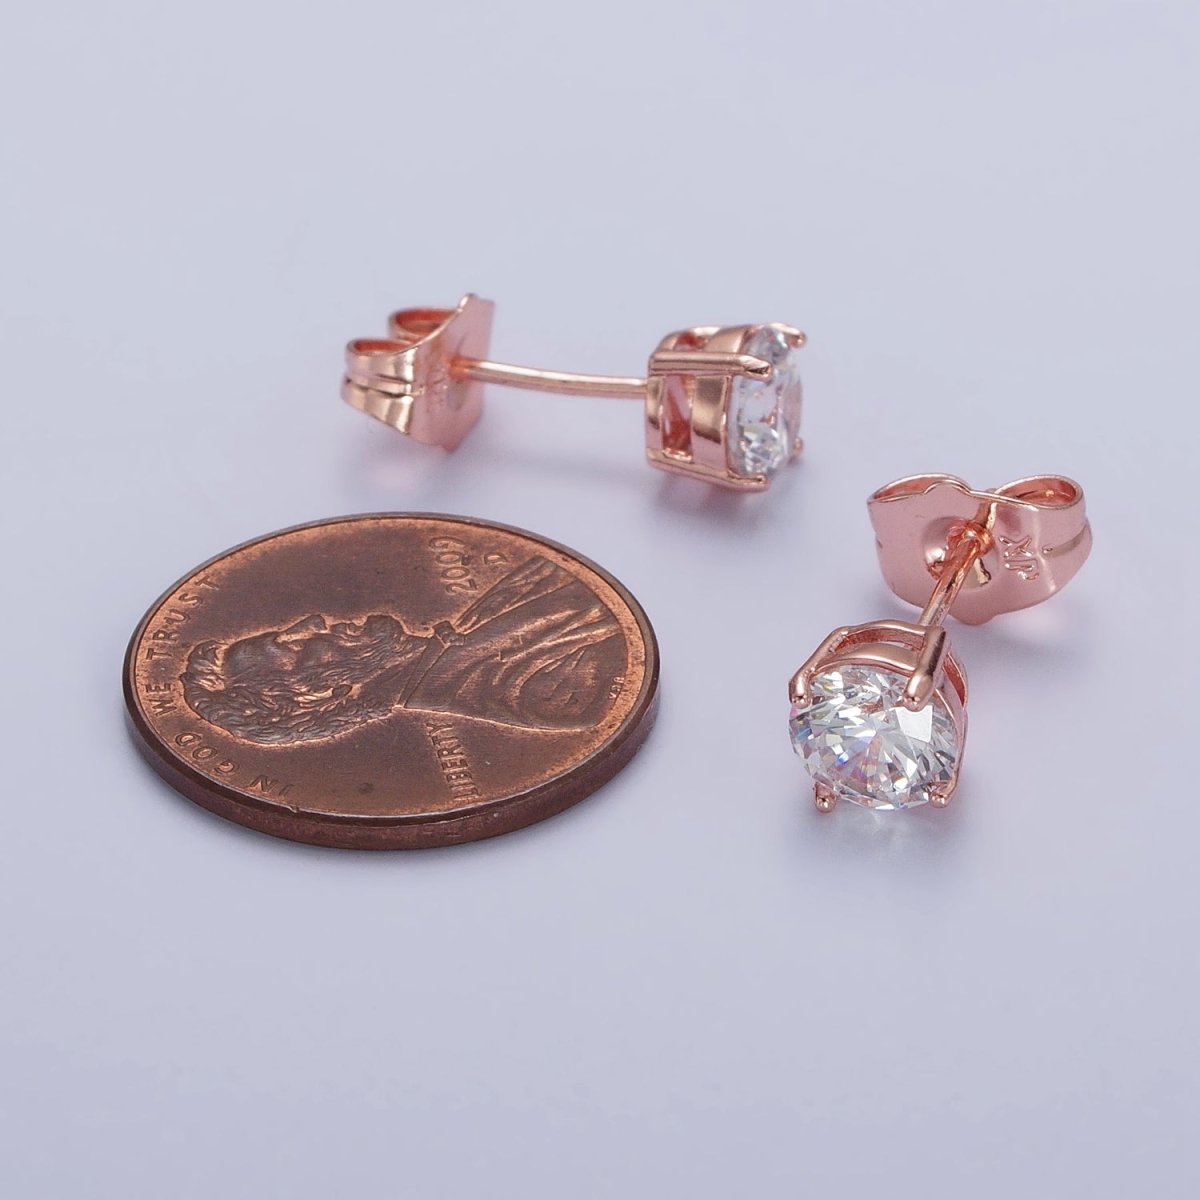 3mm, 4mm, 5mm, 6mm, 7mm, 8mm Clear Round CZ Rose Gold Stud Earrings | AB097 - AB102 - DLUXCA